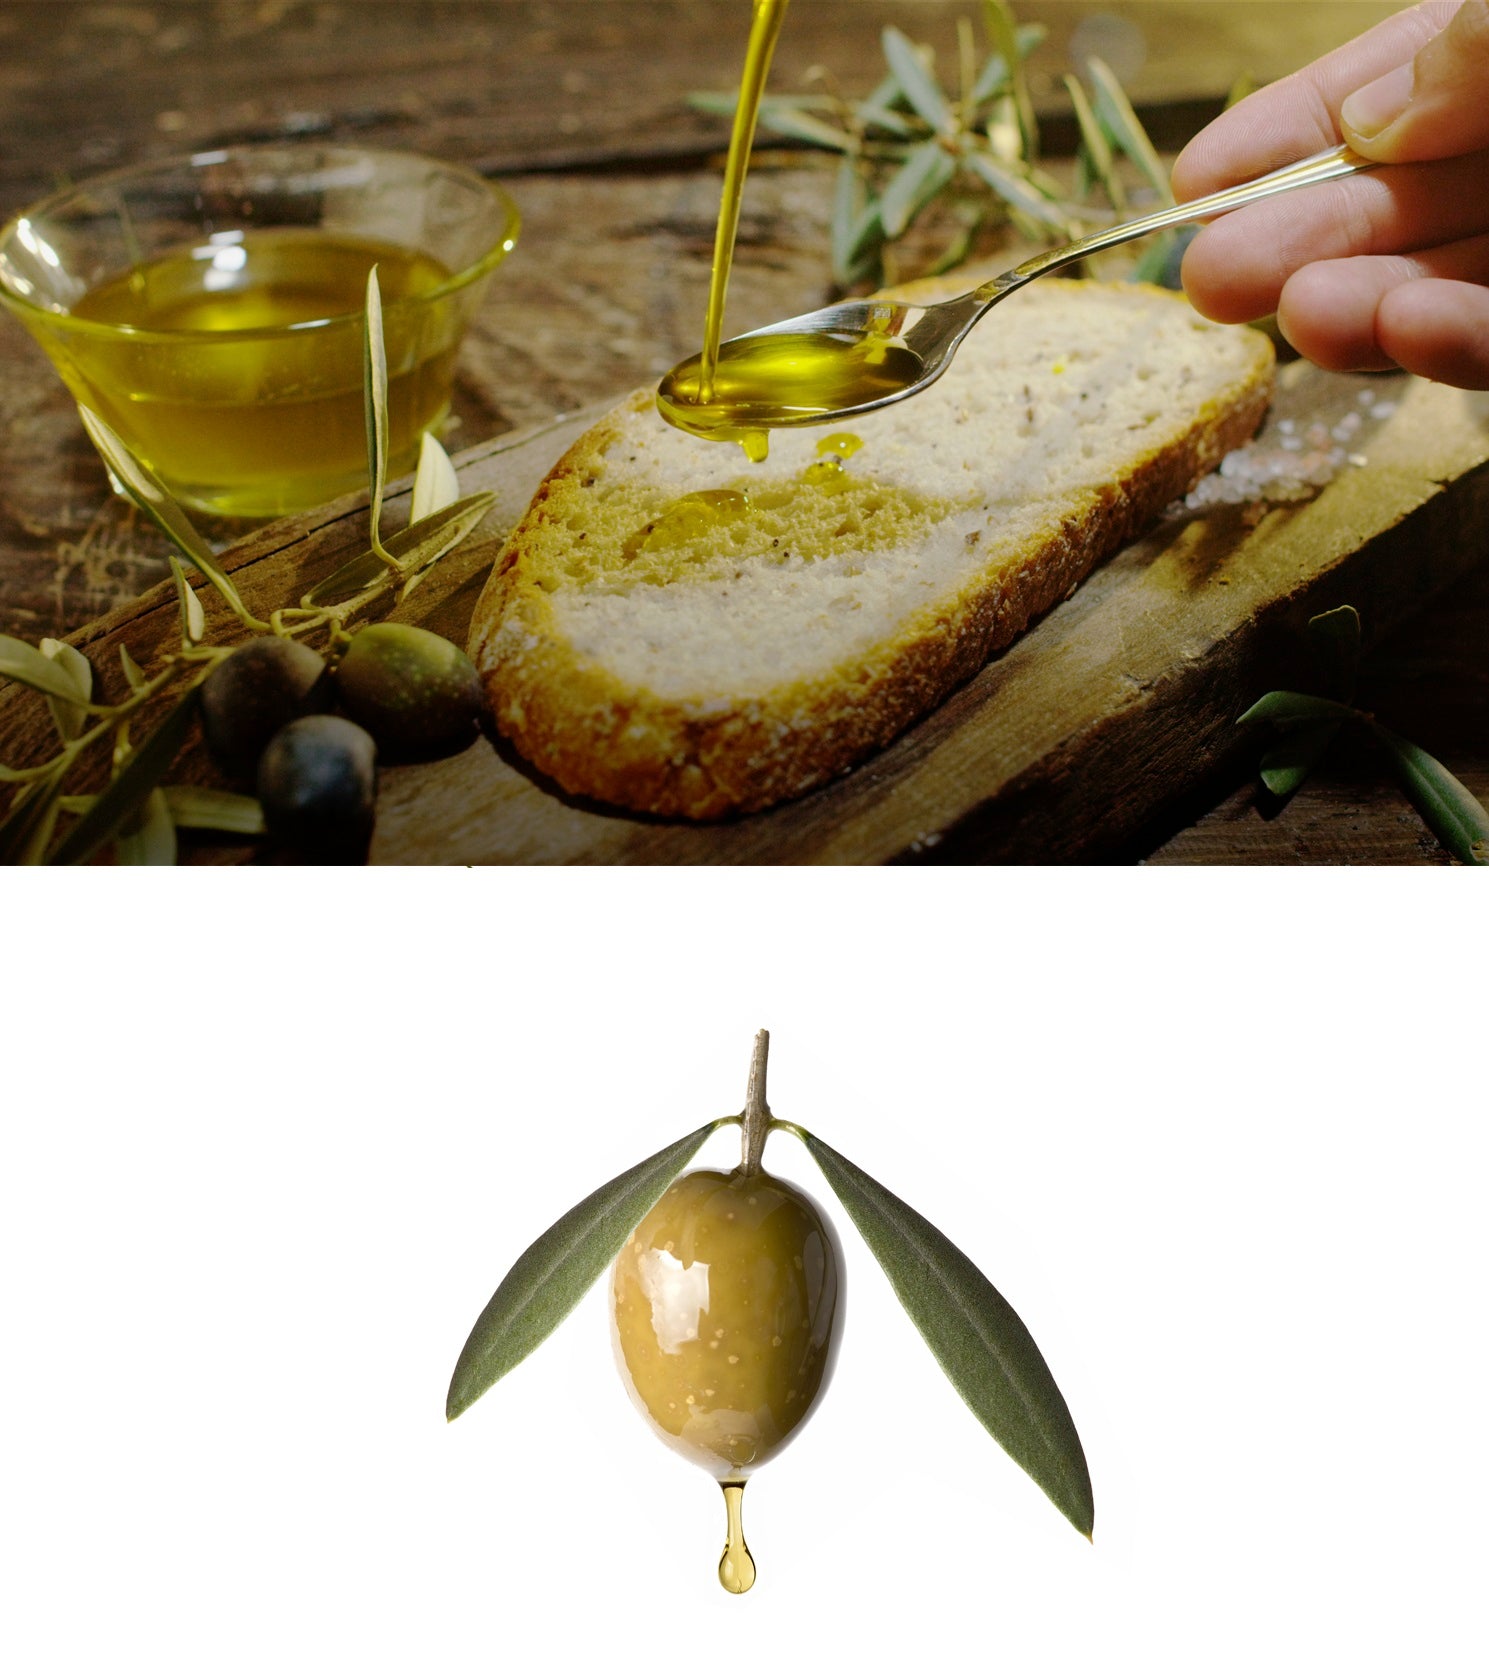 High Polyphenol and Squalene Olive Oil